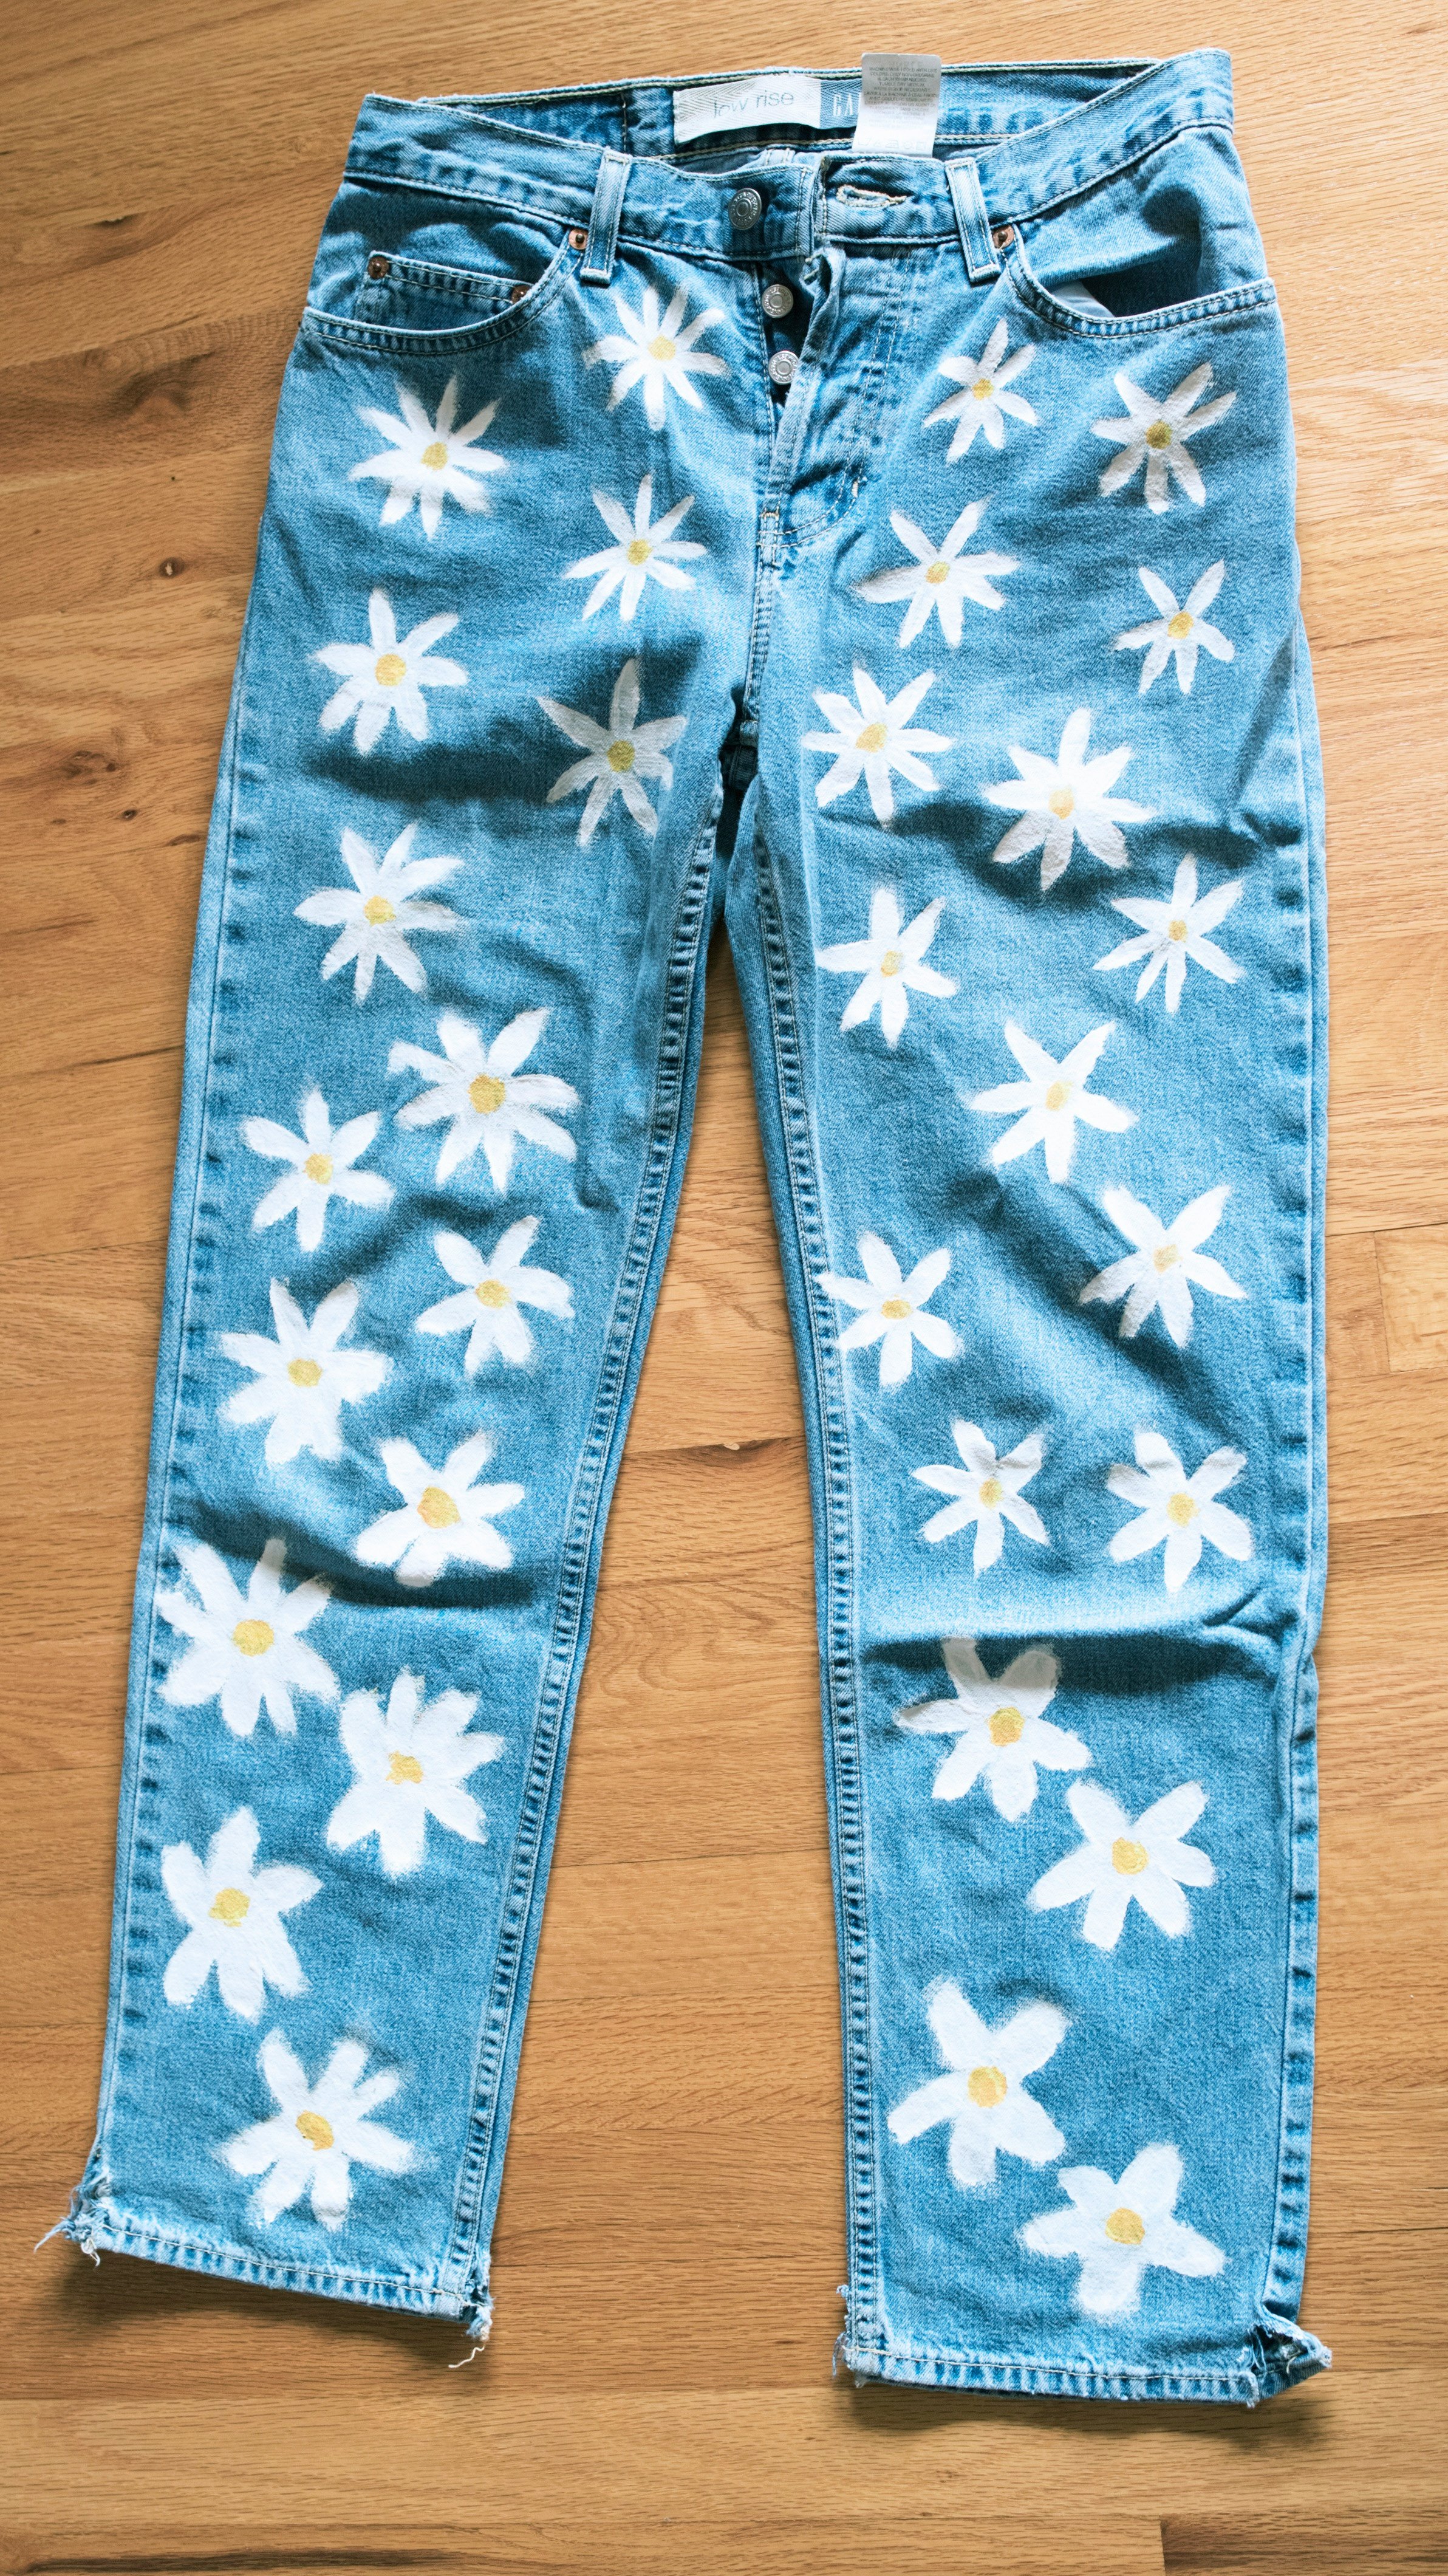 painted flowers on jeans